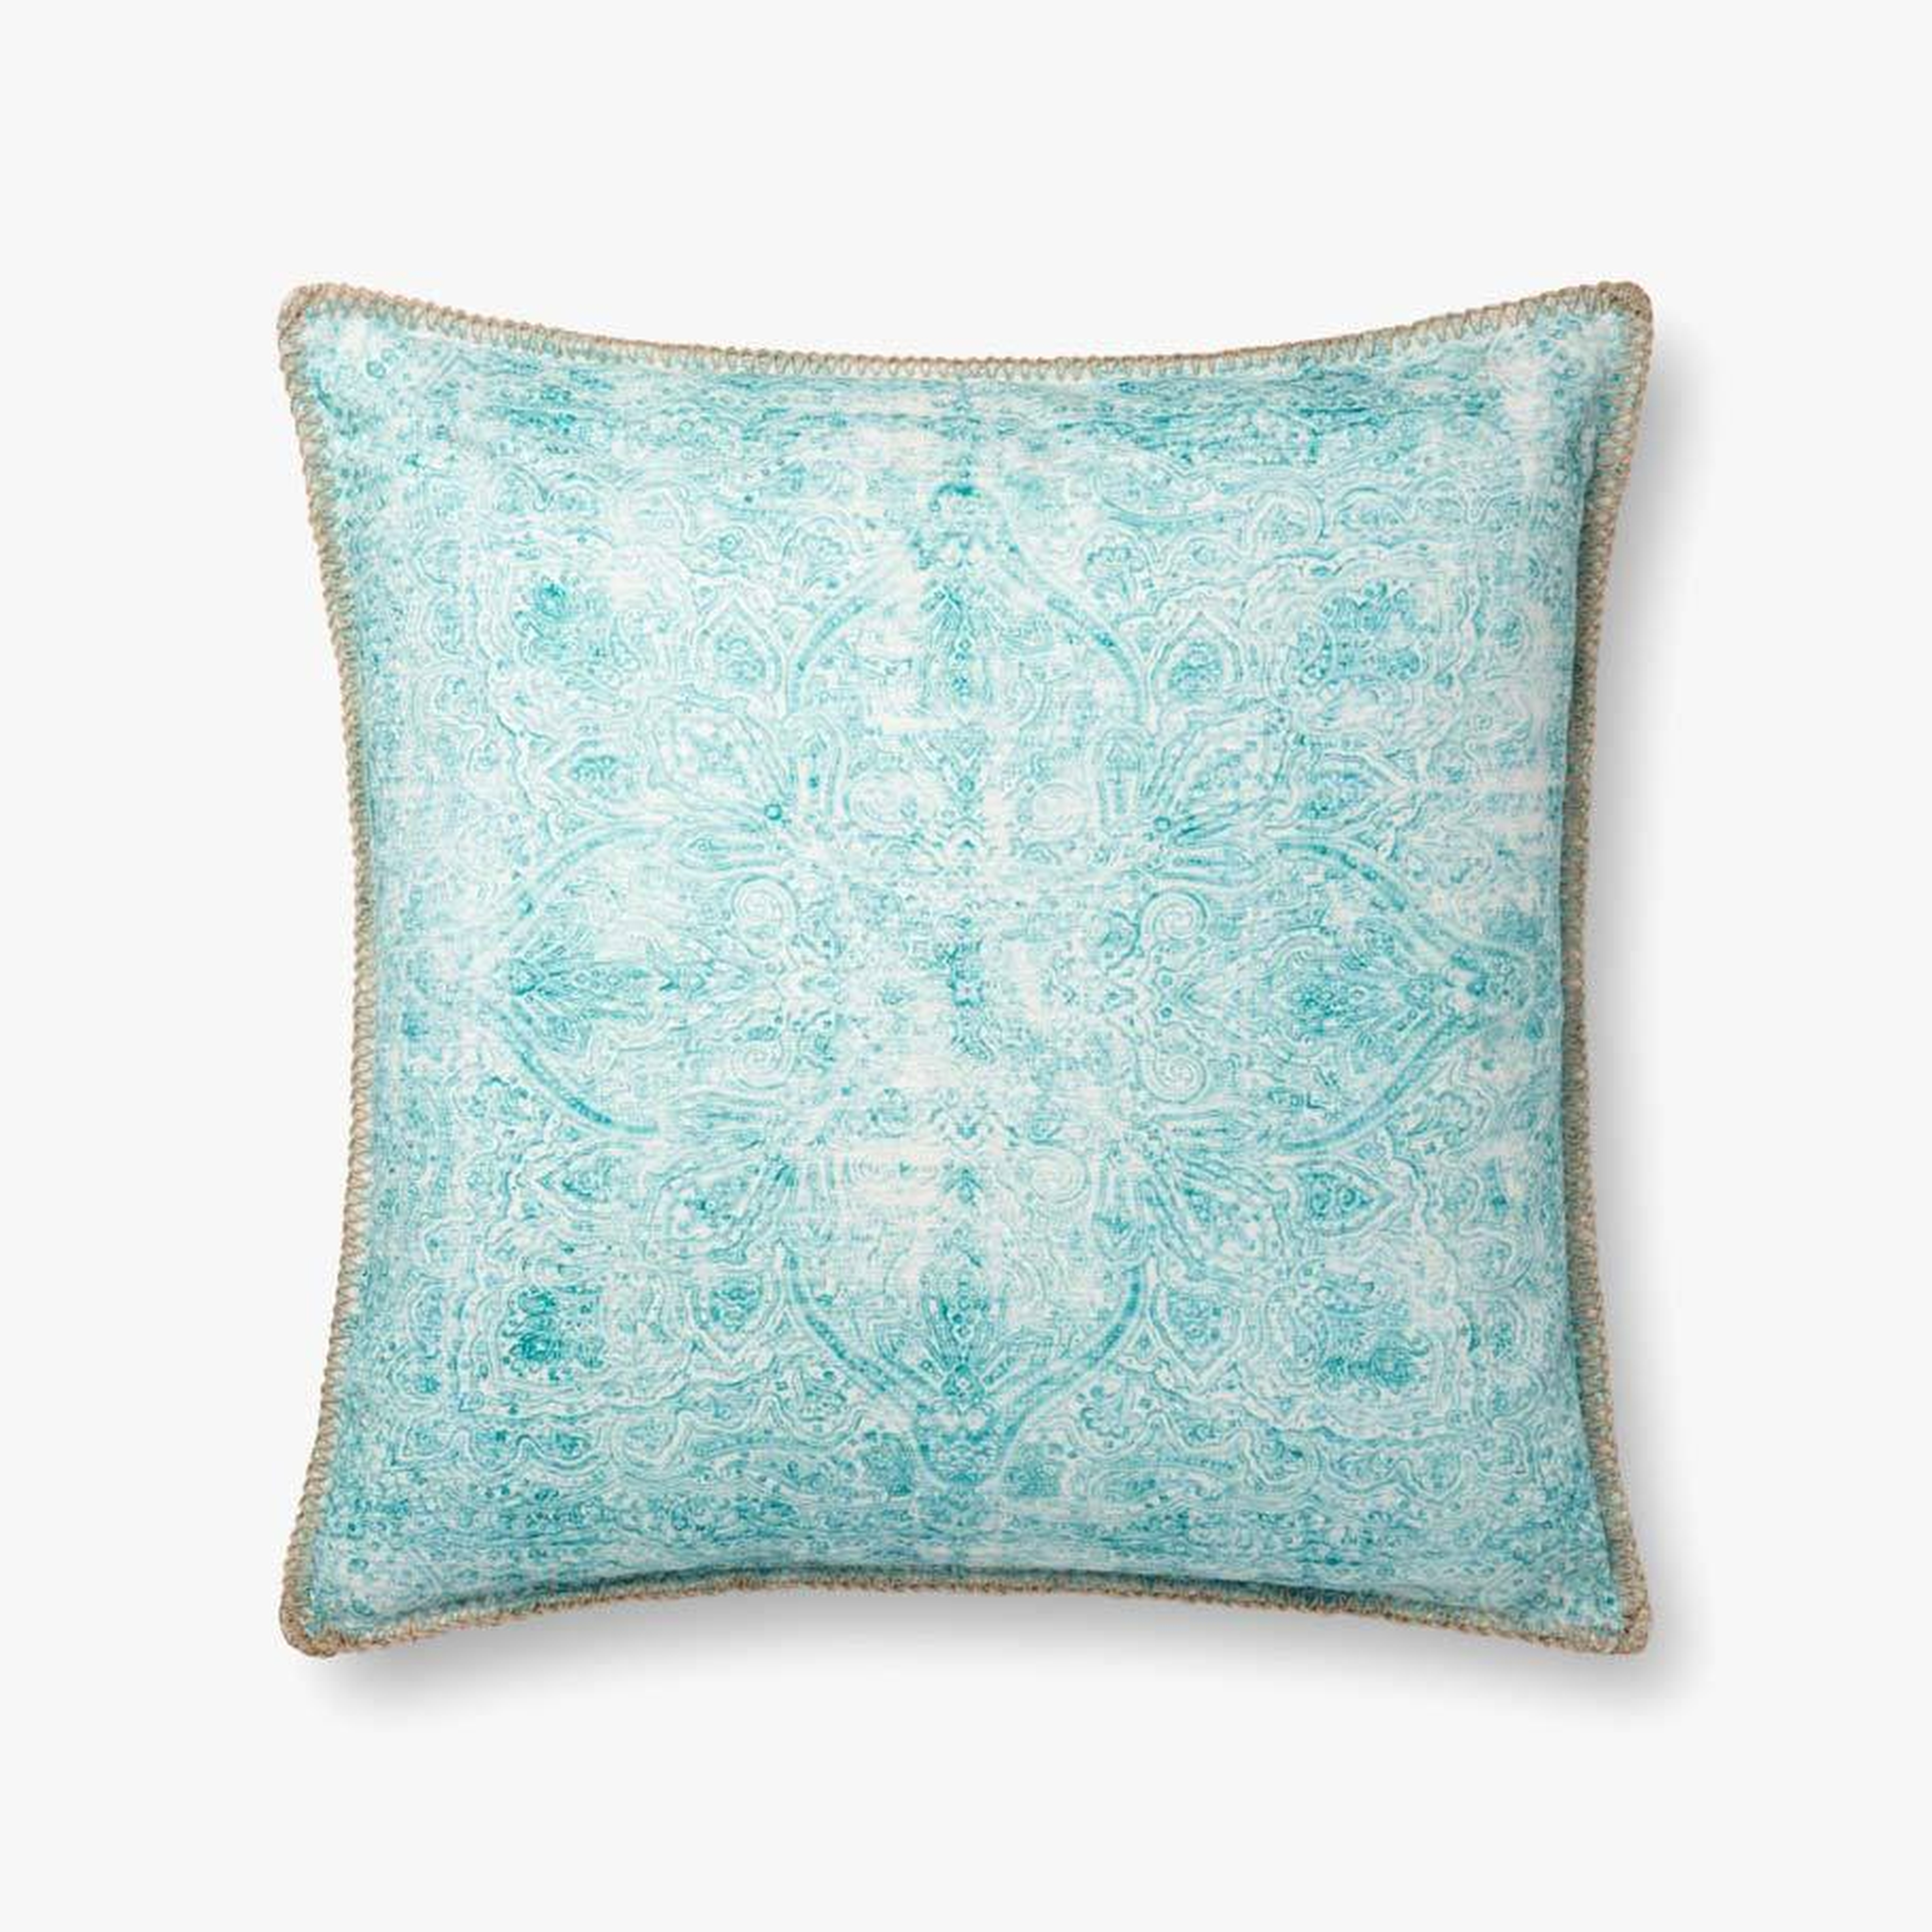 Loloi PILLOWS P0746 Teal 22" x 22" Cover w/Poly - Loloi Rugs